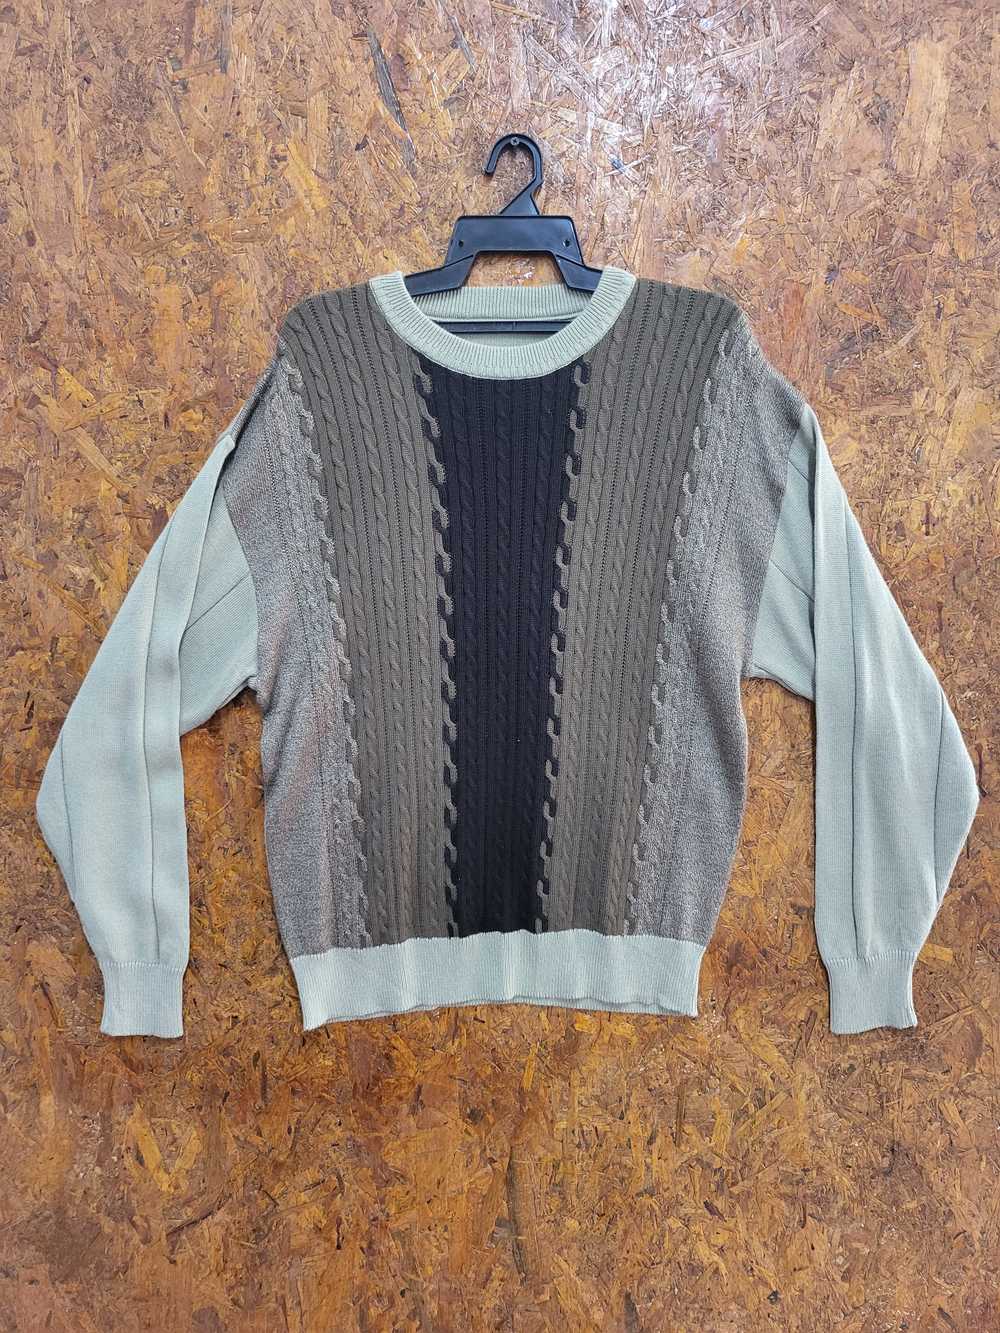 Japanese Brand - Knitwear Cable Knit - image 1